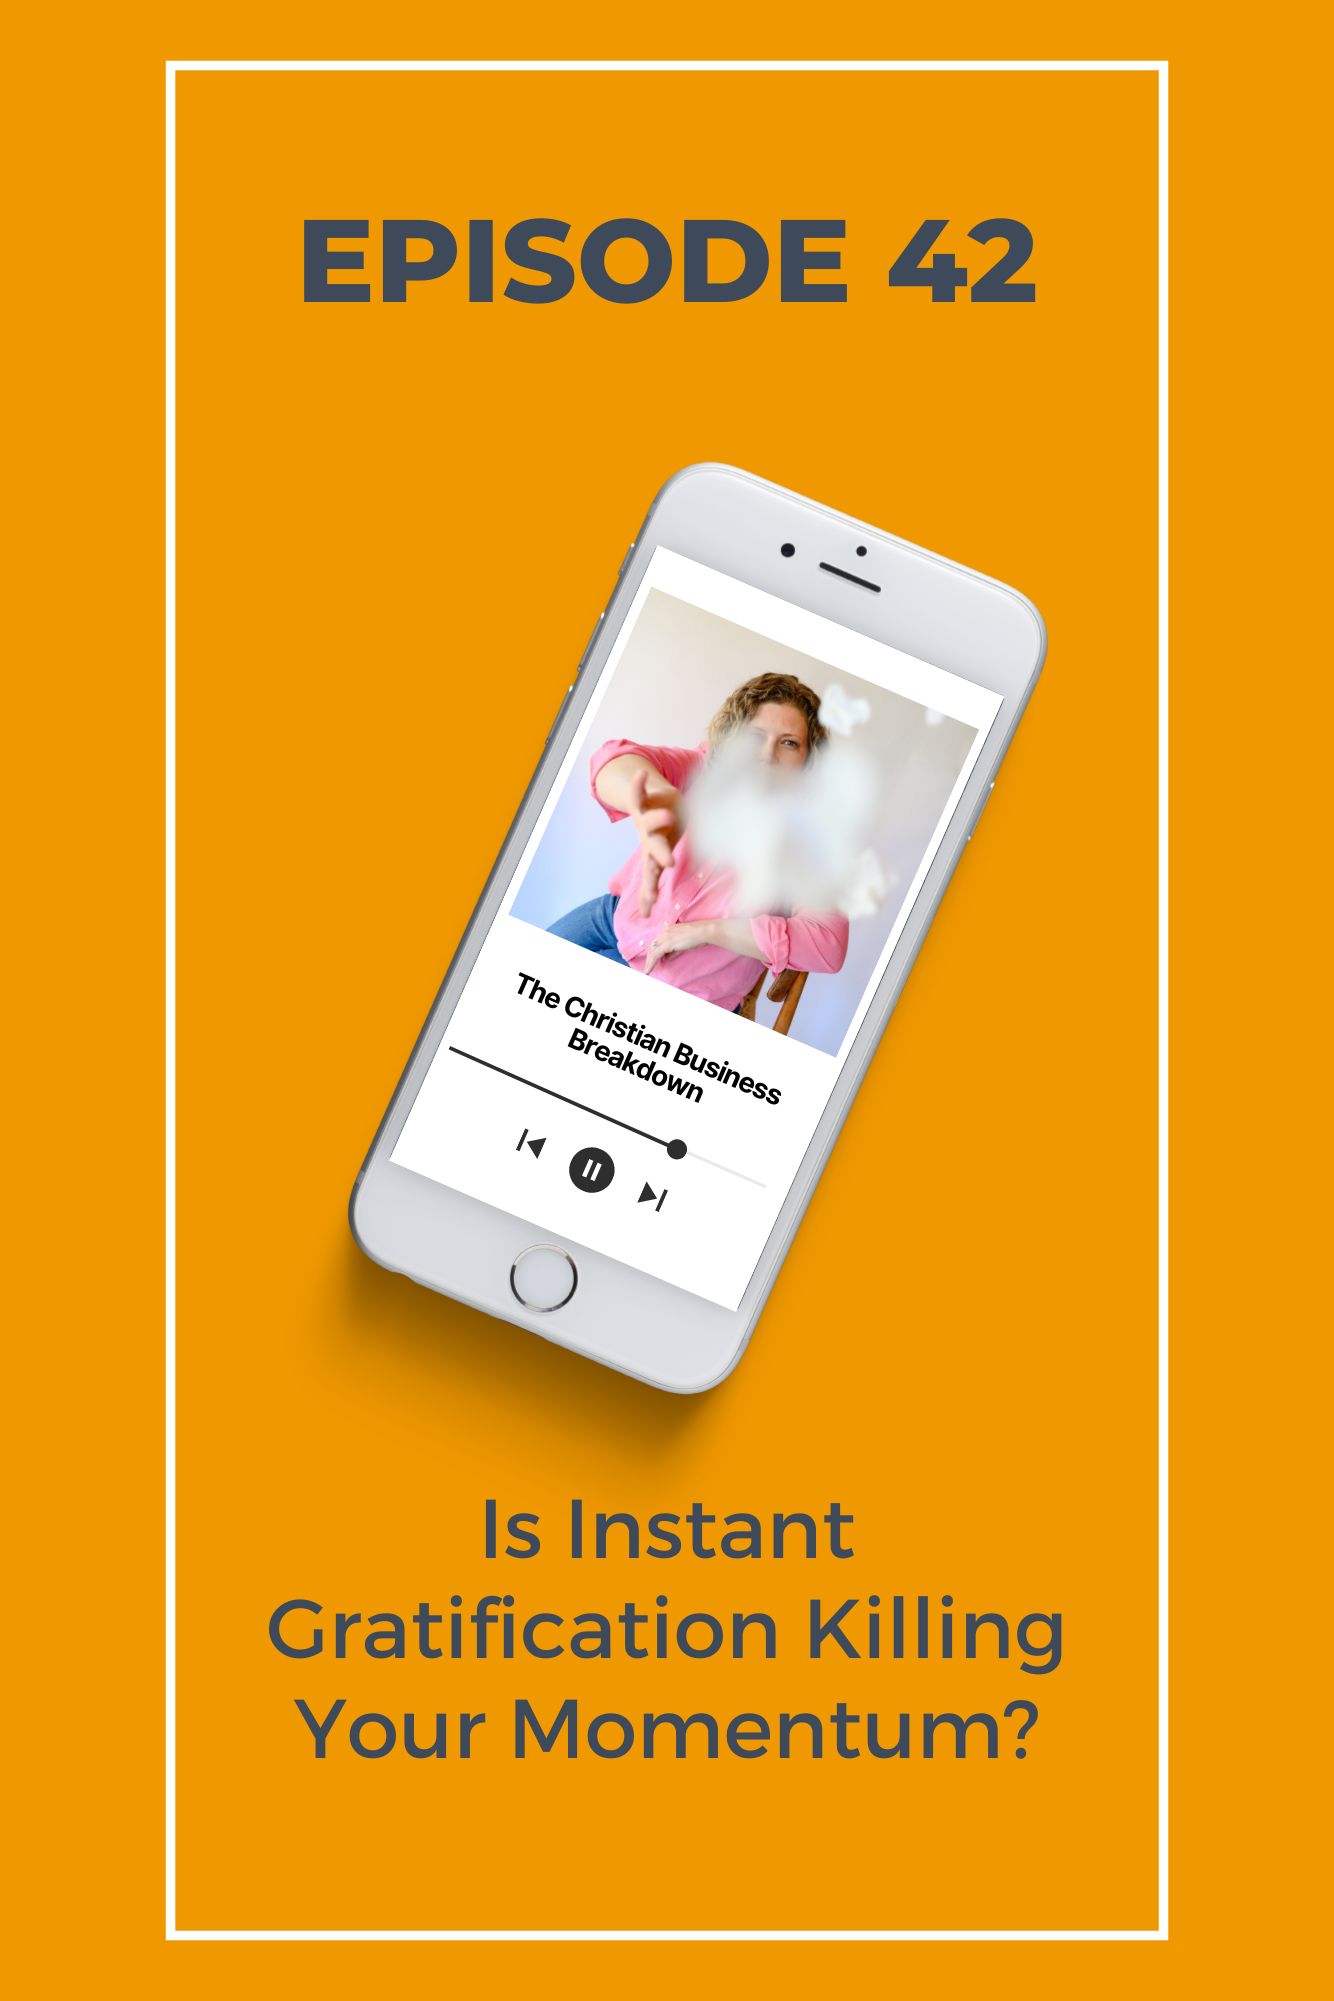 A bright yellow graphic with a phone and a picture of a Christian Business owner and podcast that is asking the question Is instant gratification killing your momentum.